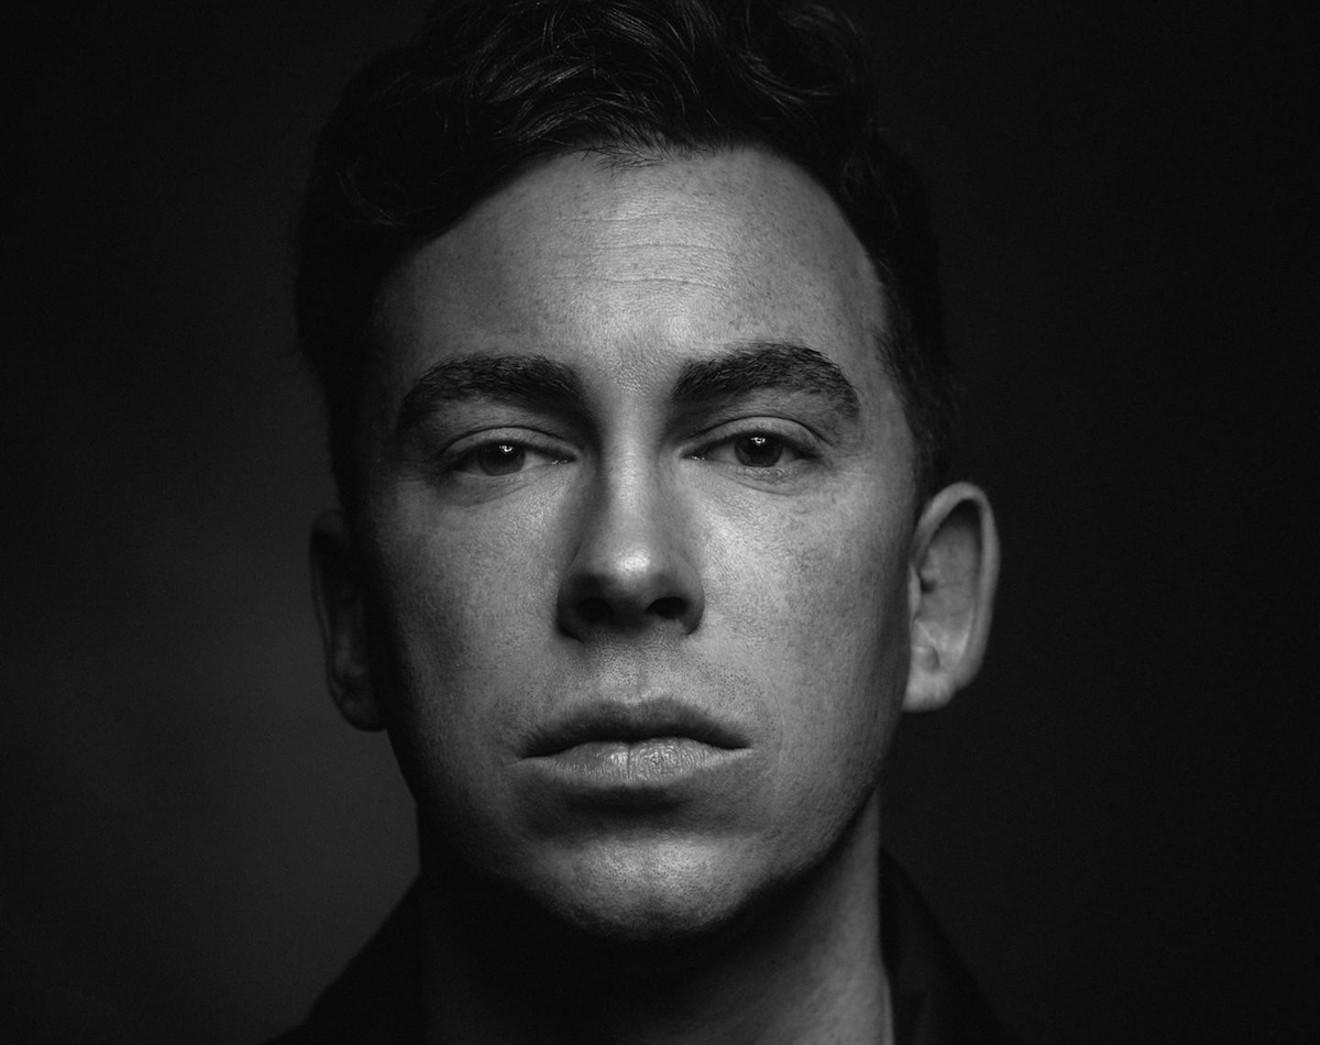 Hardwell headlines Ultra Music Festival at Bayfront Park on Friday, March 22.